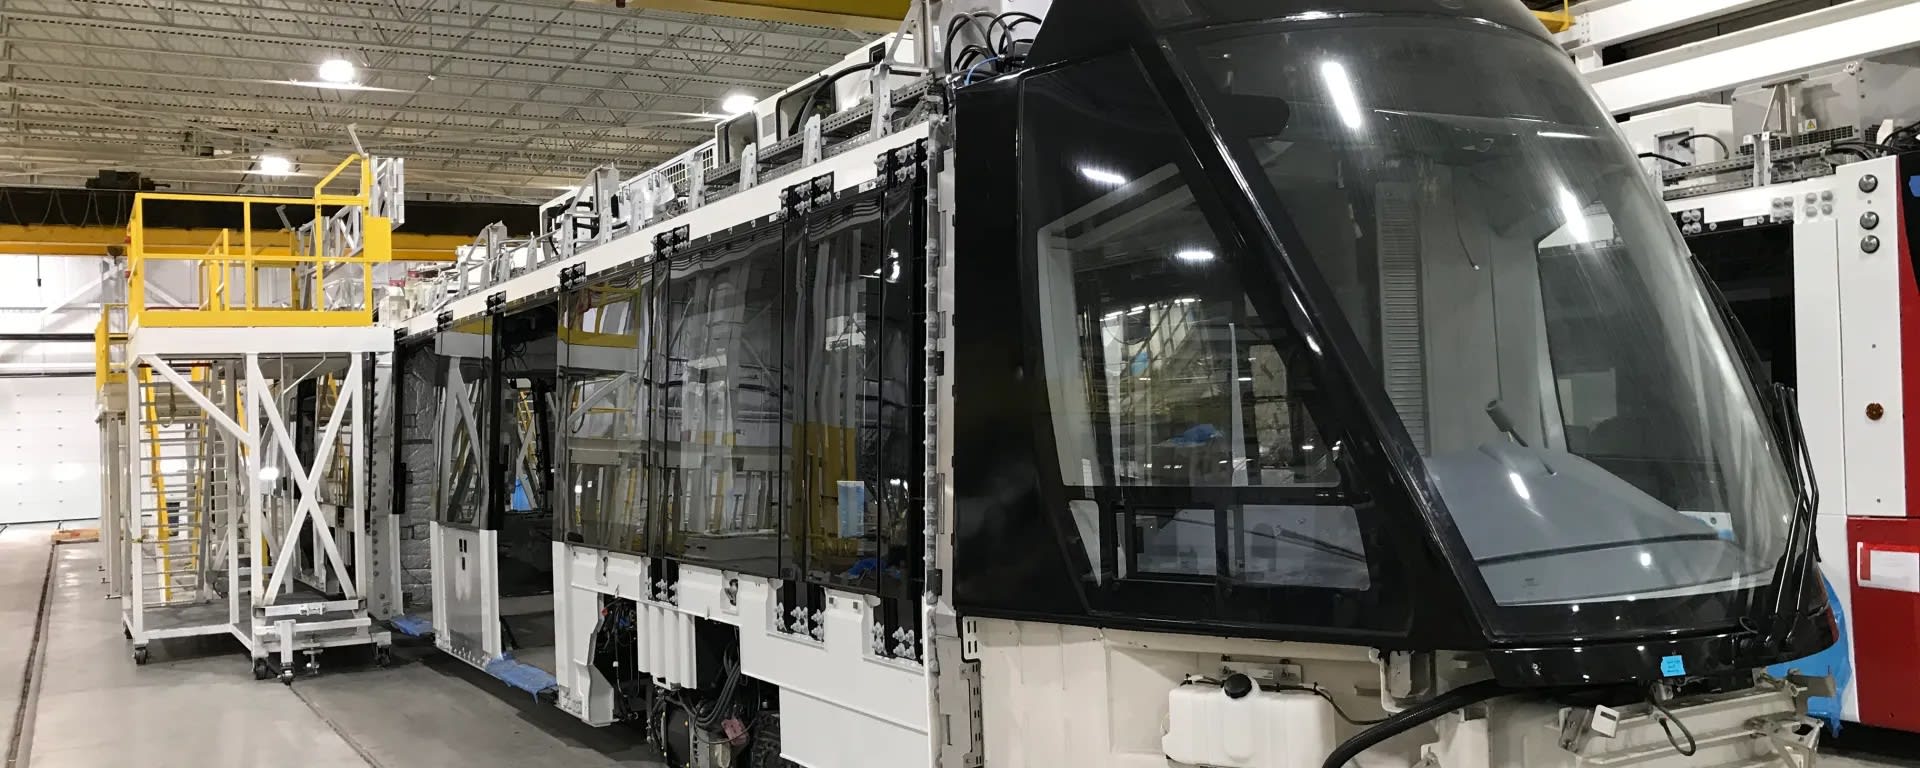 Before they glide smoothly through Toronto, transit vehicles have to get built somewhere.